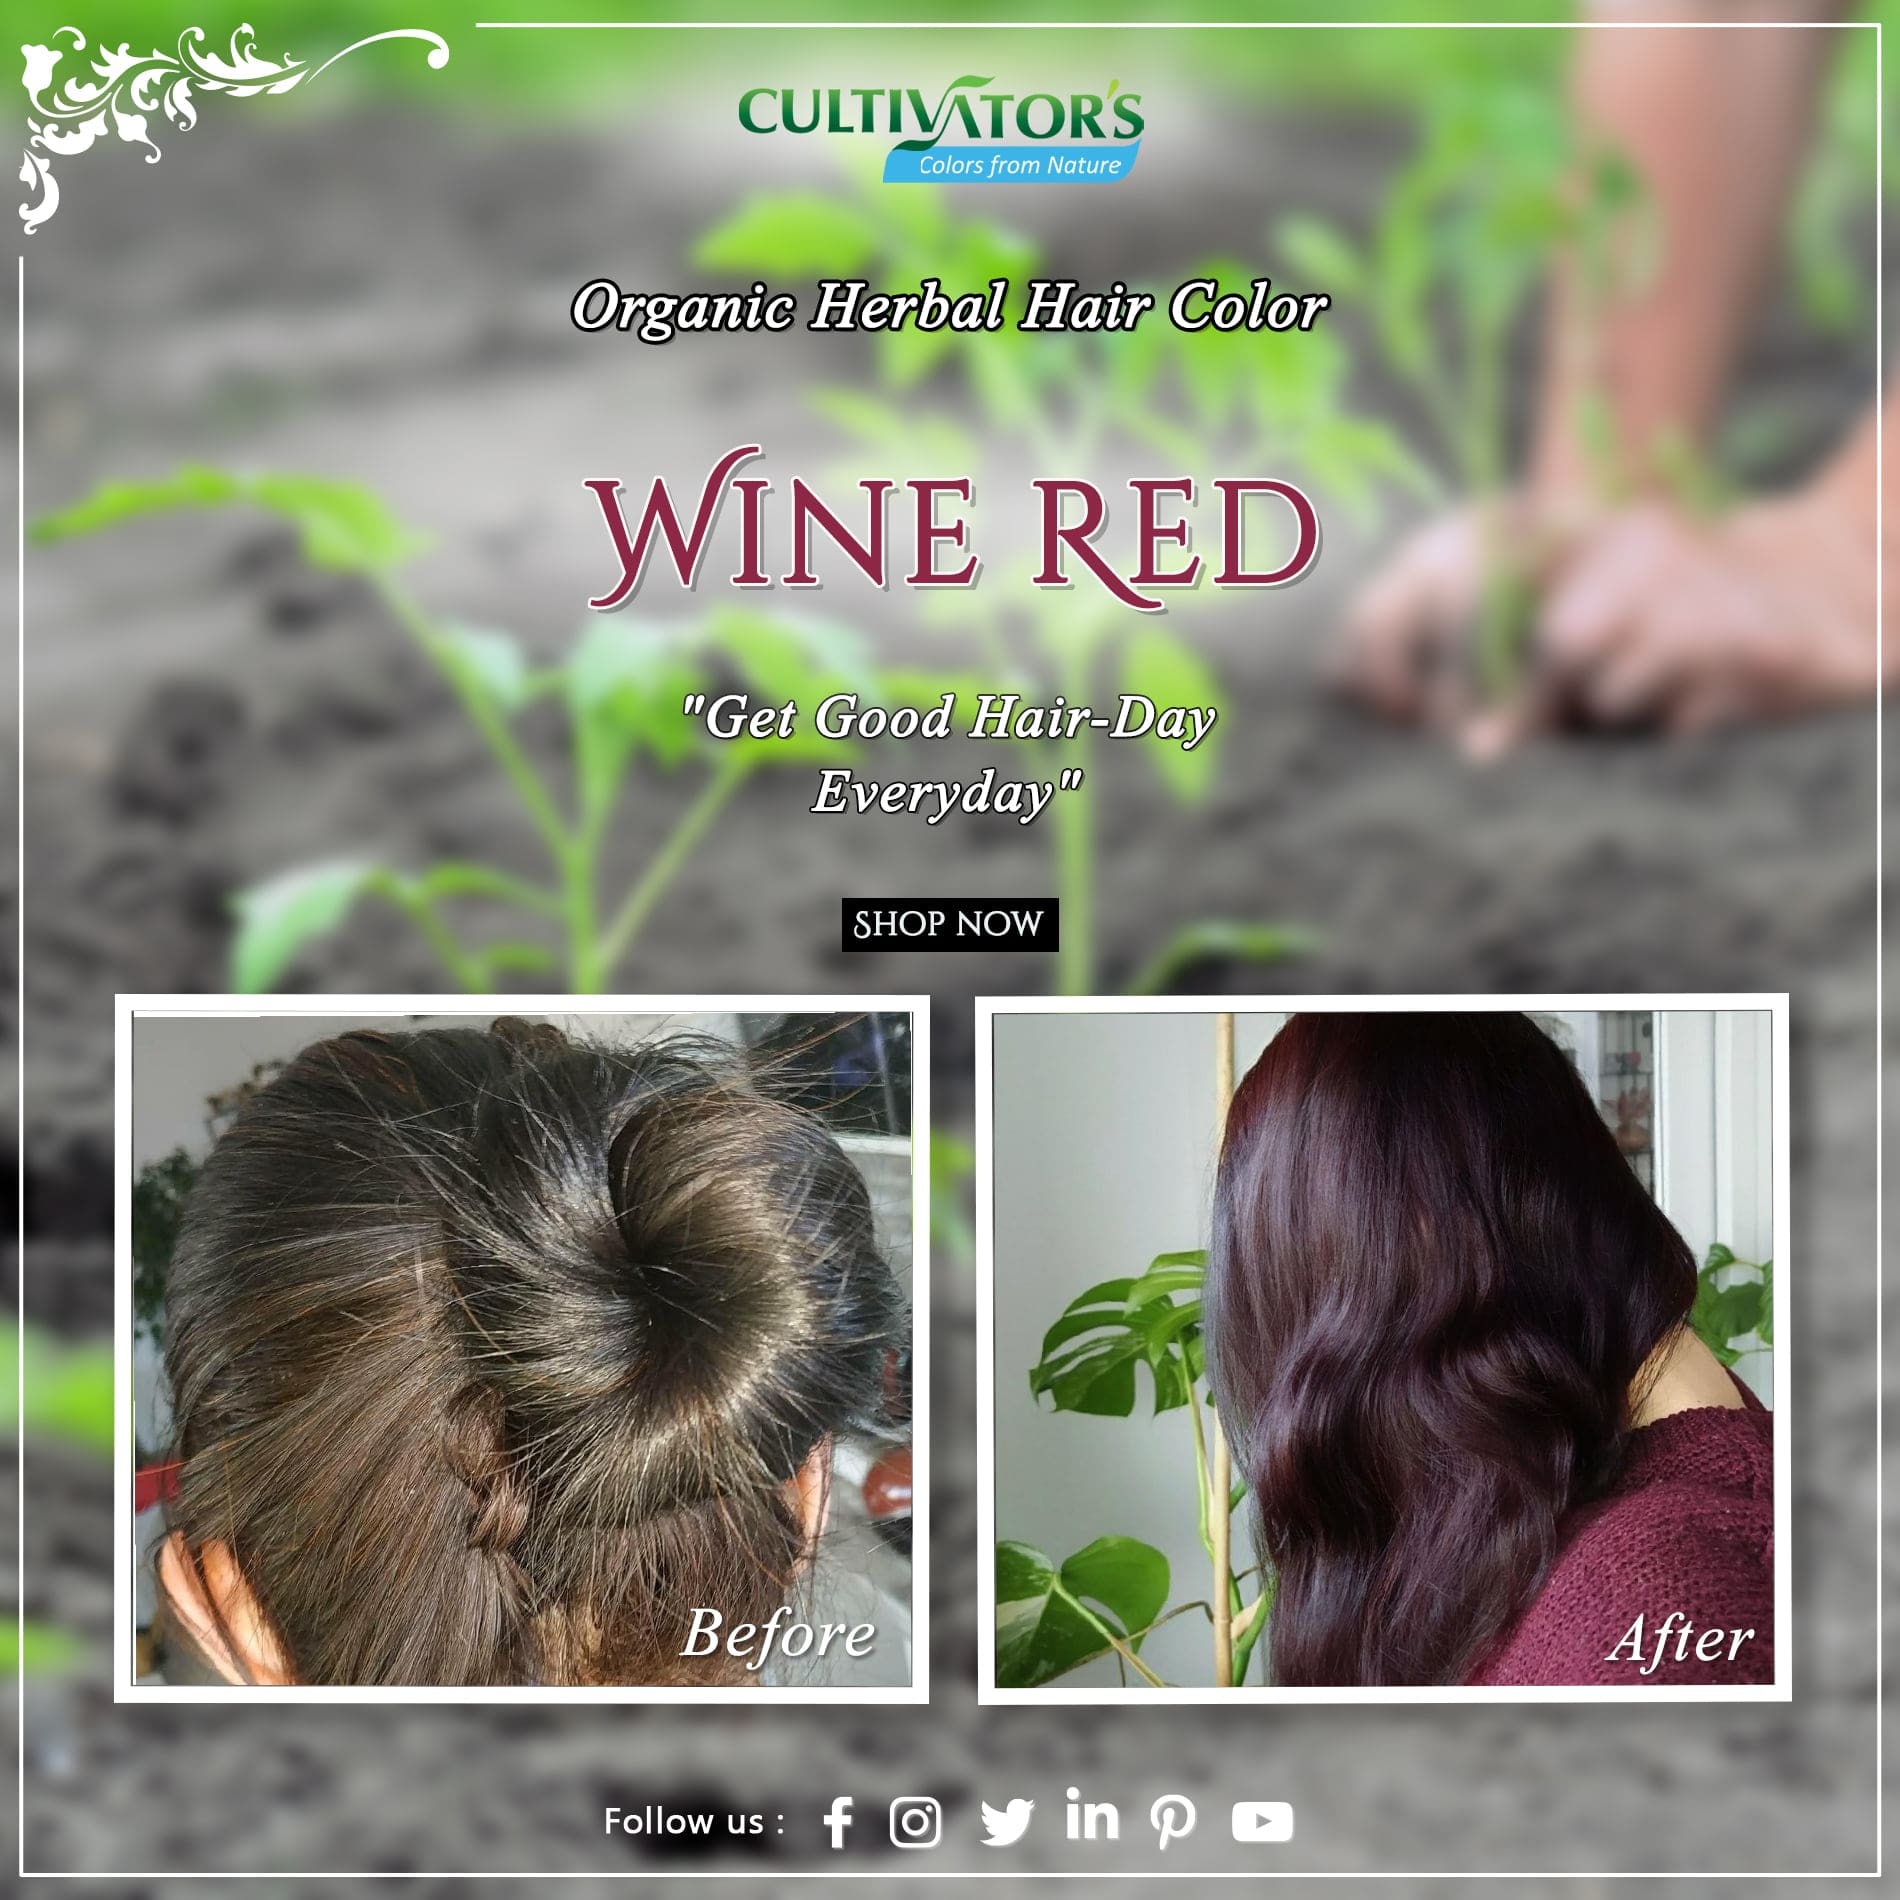 Coloration Wine Red - Cultivator's India - MA PLANETE BEAUTE